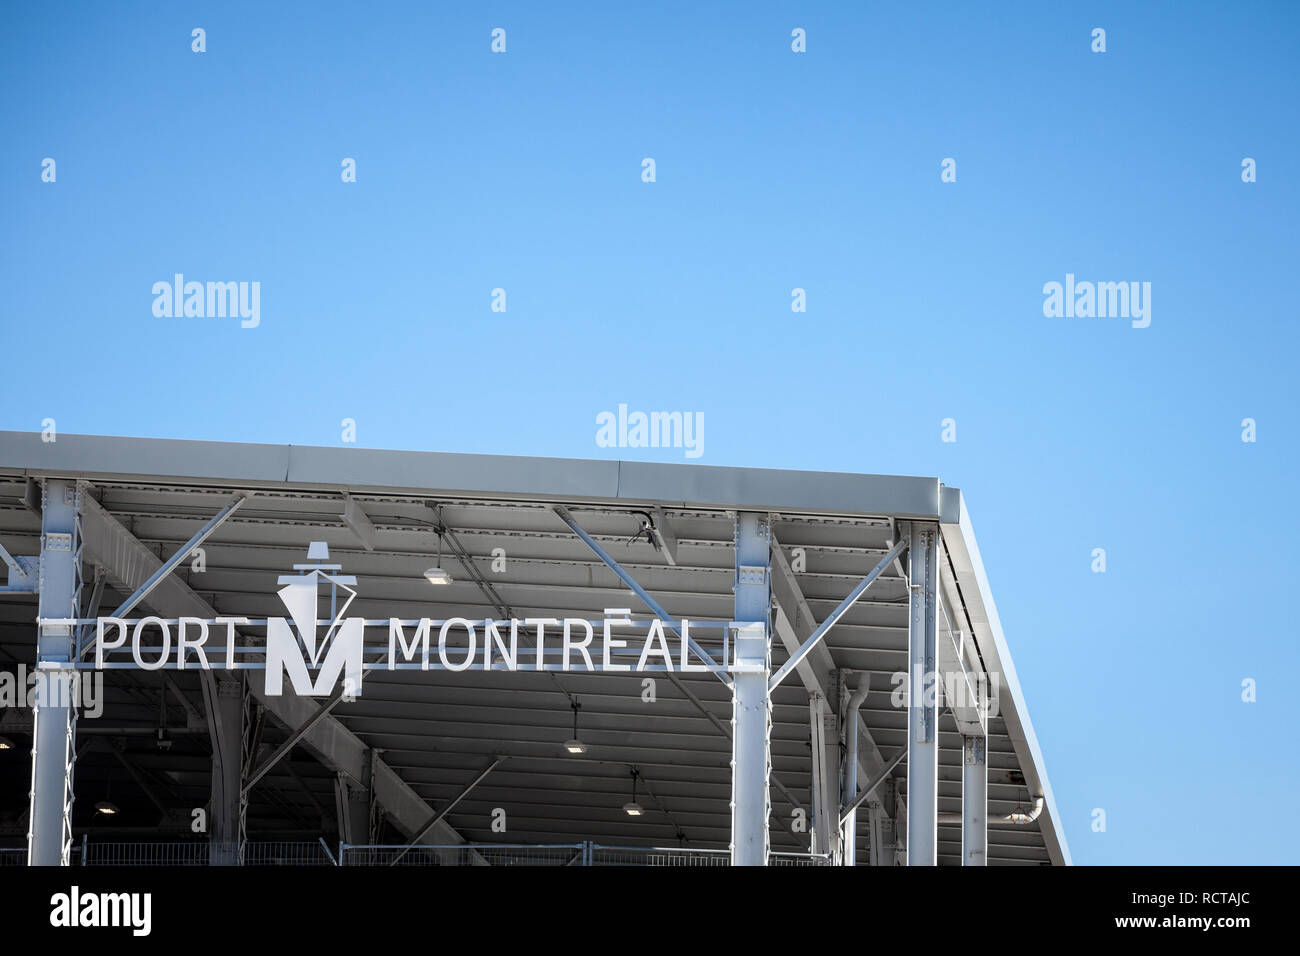 MONTREAL, CANADA - NOVEMBER 4, 2018: port de Montreal logo, in front of their docks in old Montreal, Quebec. Called as well Montreal port, it is a mai Stock Photo